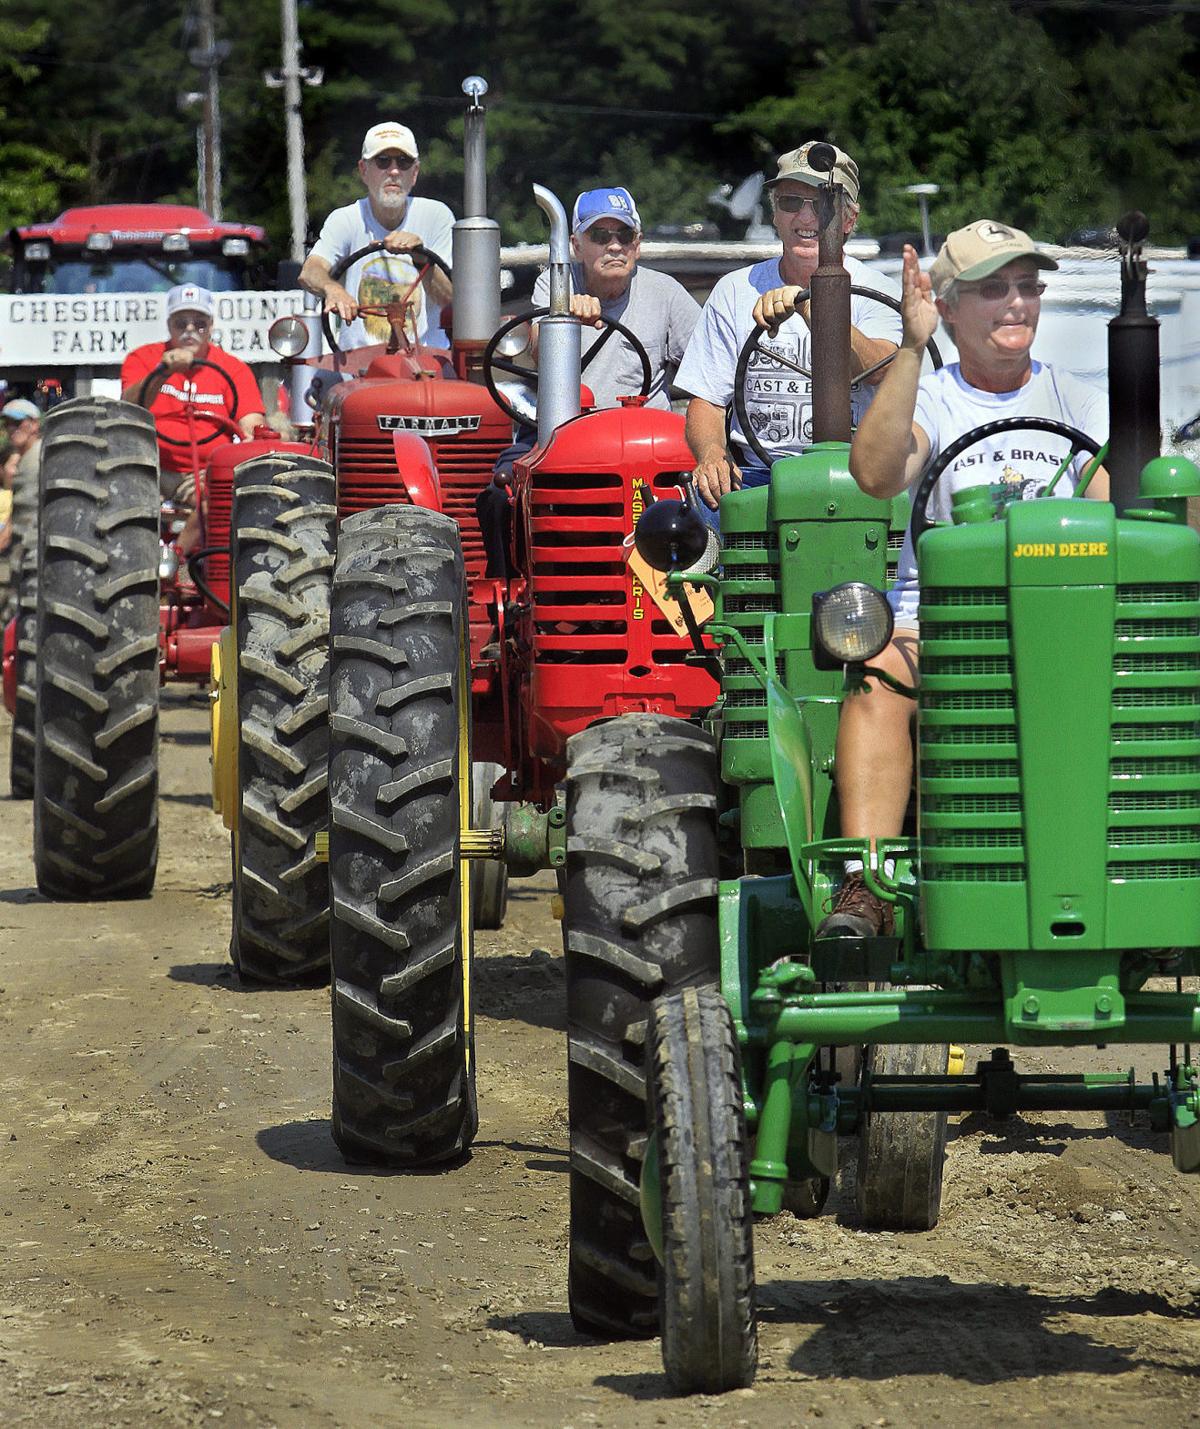 Return of antique tractor parade to Cheshire Fair comes with memories